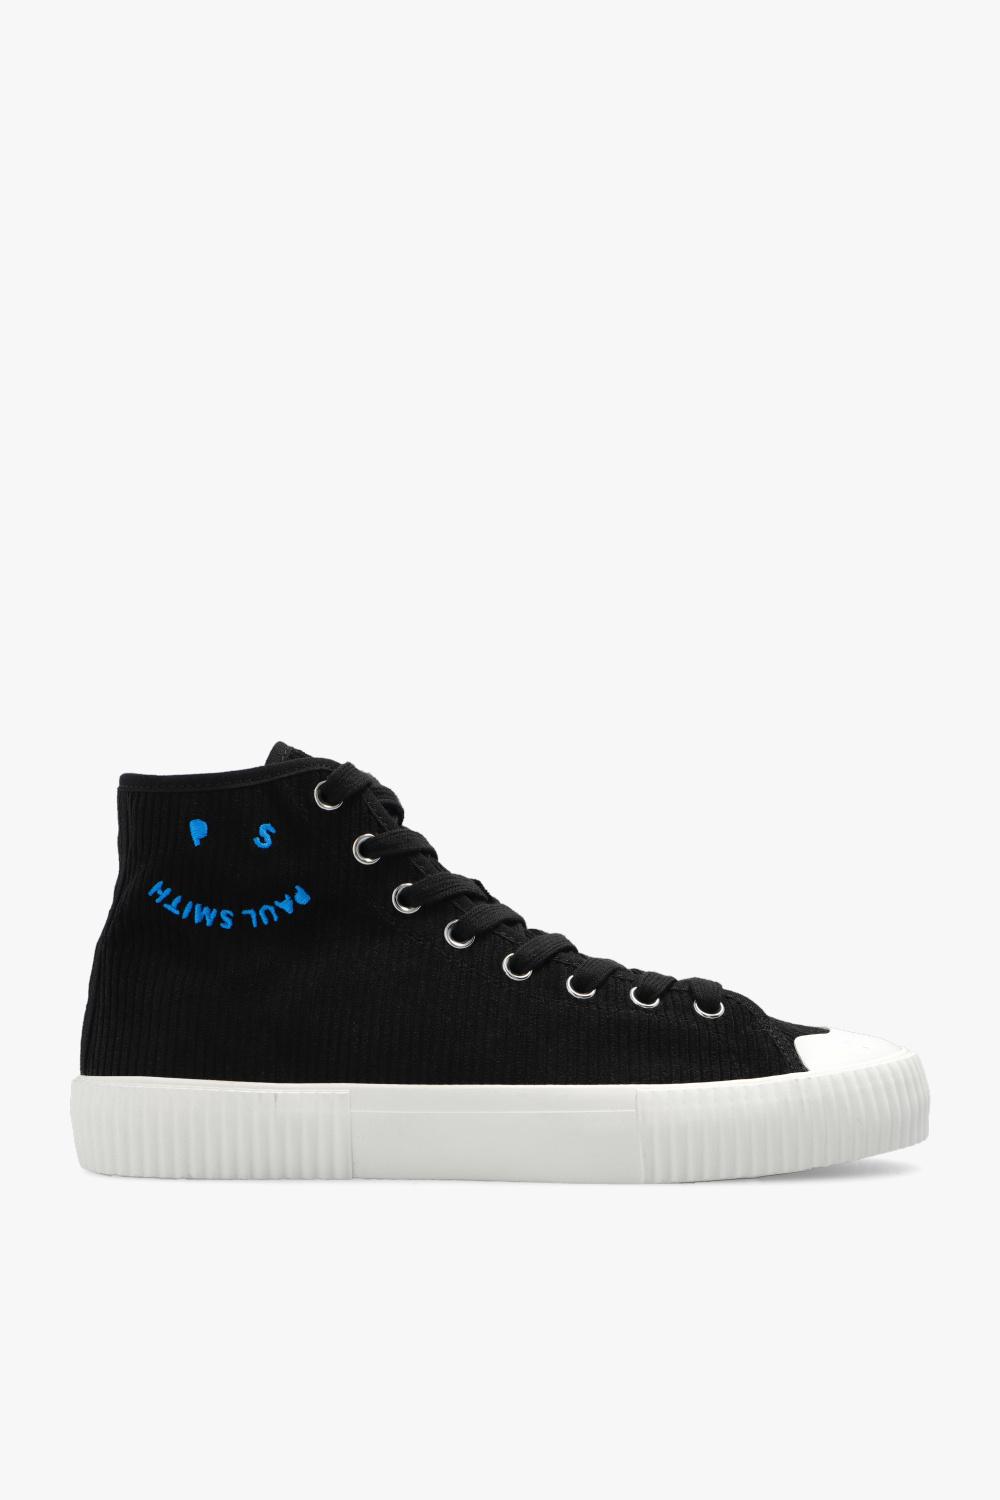 PS by Paul Smith 'kibby' Corduroy High-top Sneakers in Black for Men | Lyst